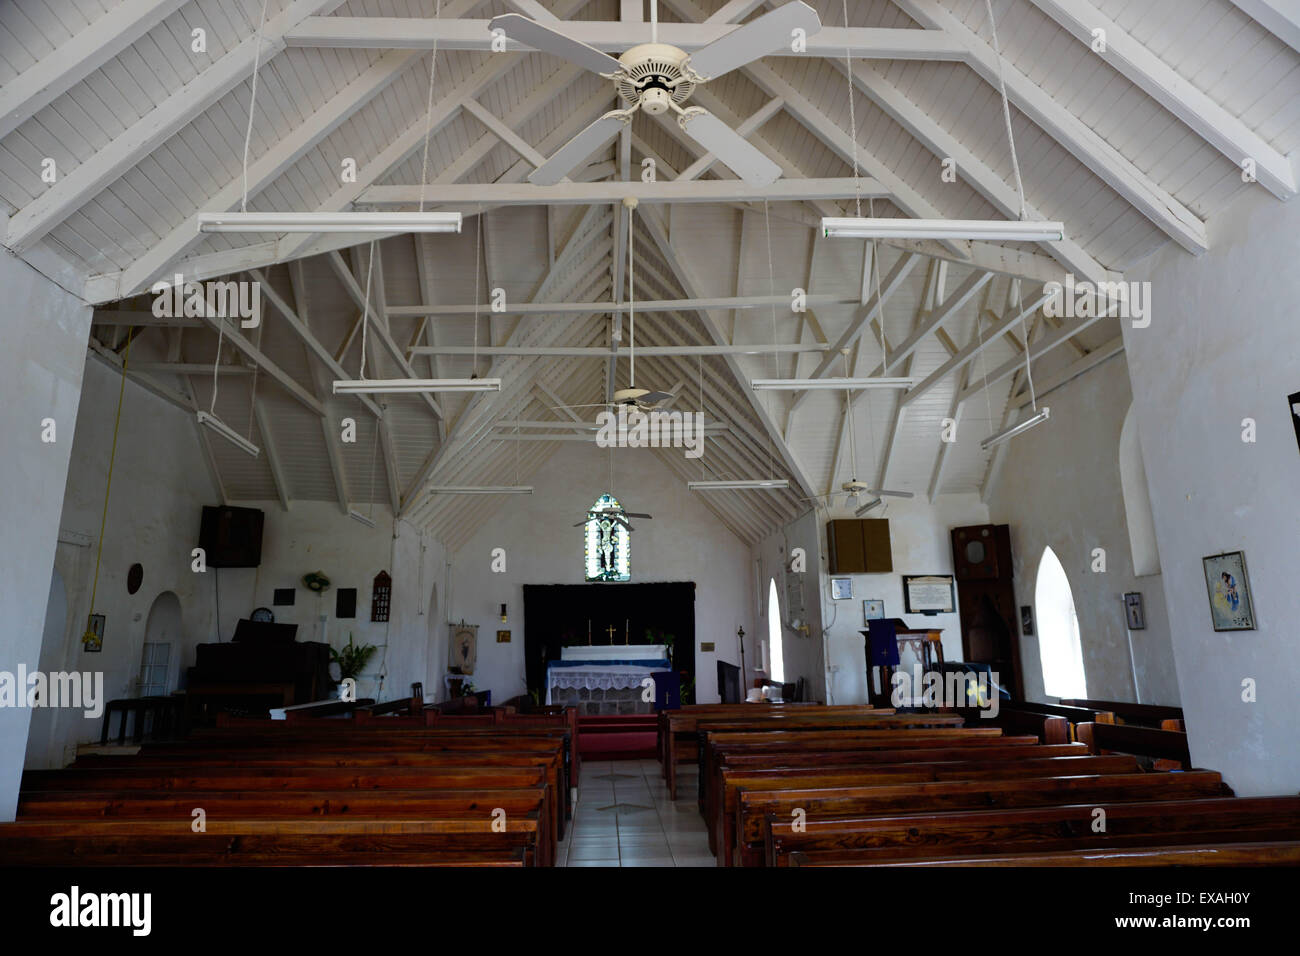 St. Thomas Anglican Church built in 1643, Nevis, St. Kitts and Nevis, Leeward Islands, West Indies, Caribbean, Central America Stock Photo